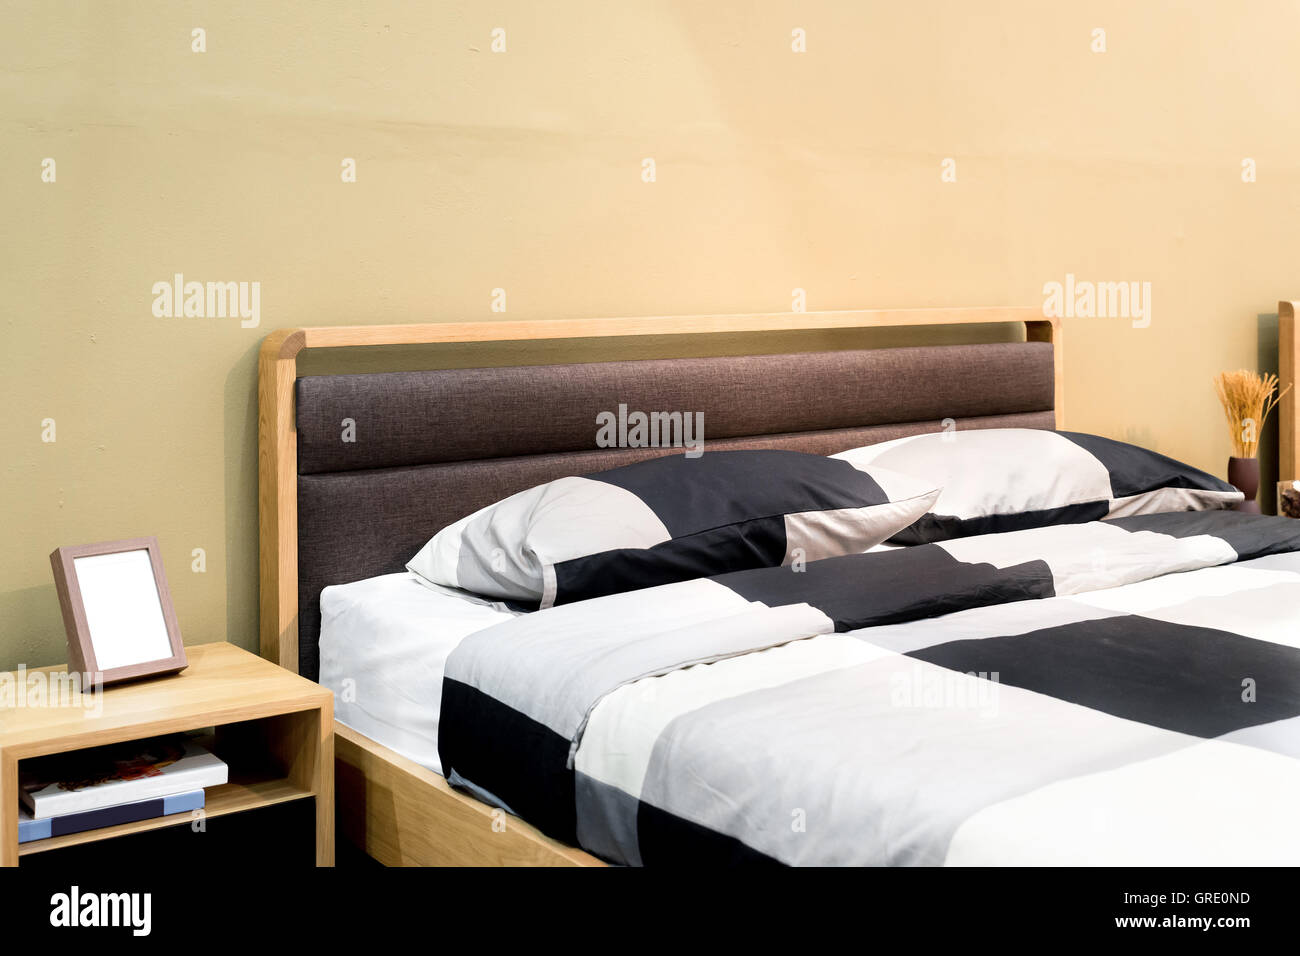 Chess bed with pillow and shelf in modern bedroom. Bedroom interior Stock Photo